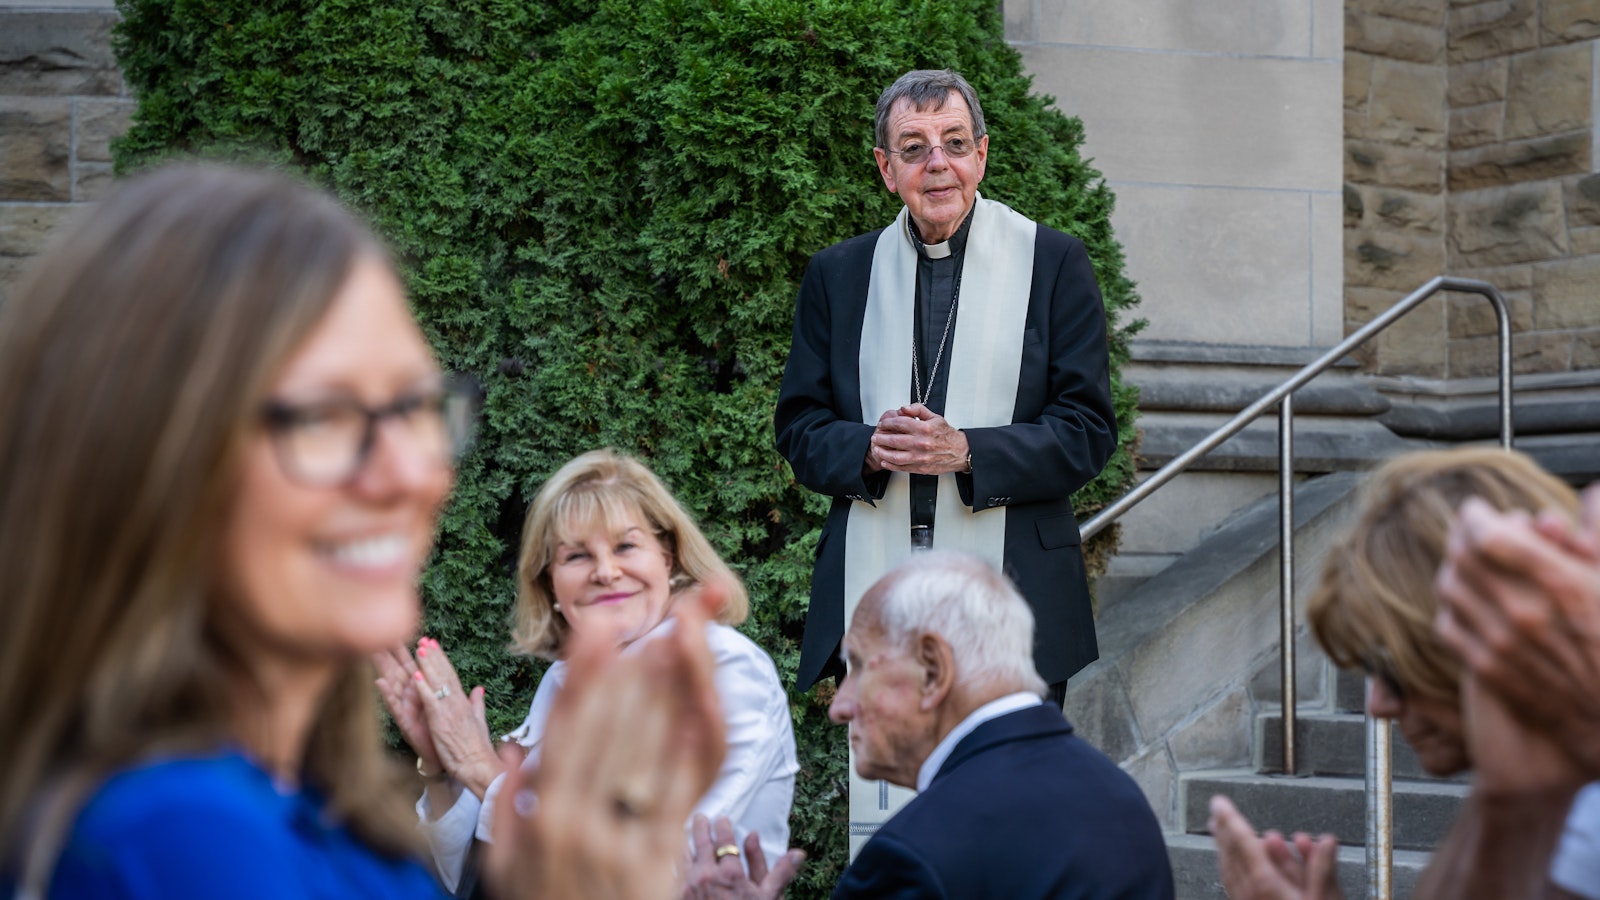 Archbishop Vigneron smiles during a blessing of a new grotto dedicated to Our Lady of Lourdes at the Cathedral of the Most Blessed Sacrament on Oct. 3, 2023. At the start of the COVID-19 pandemic, the archbishop pledged to build a grotto "as a lasting token of our gratitude" for the Blessed Virgin Mary's protection and a "perpetual reminder" of her care for the Archdiocese of Detroit. (Valaurian Waller | Detroit Catholic)